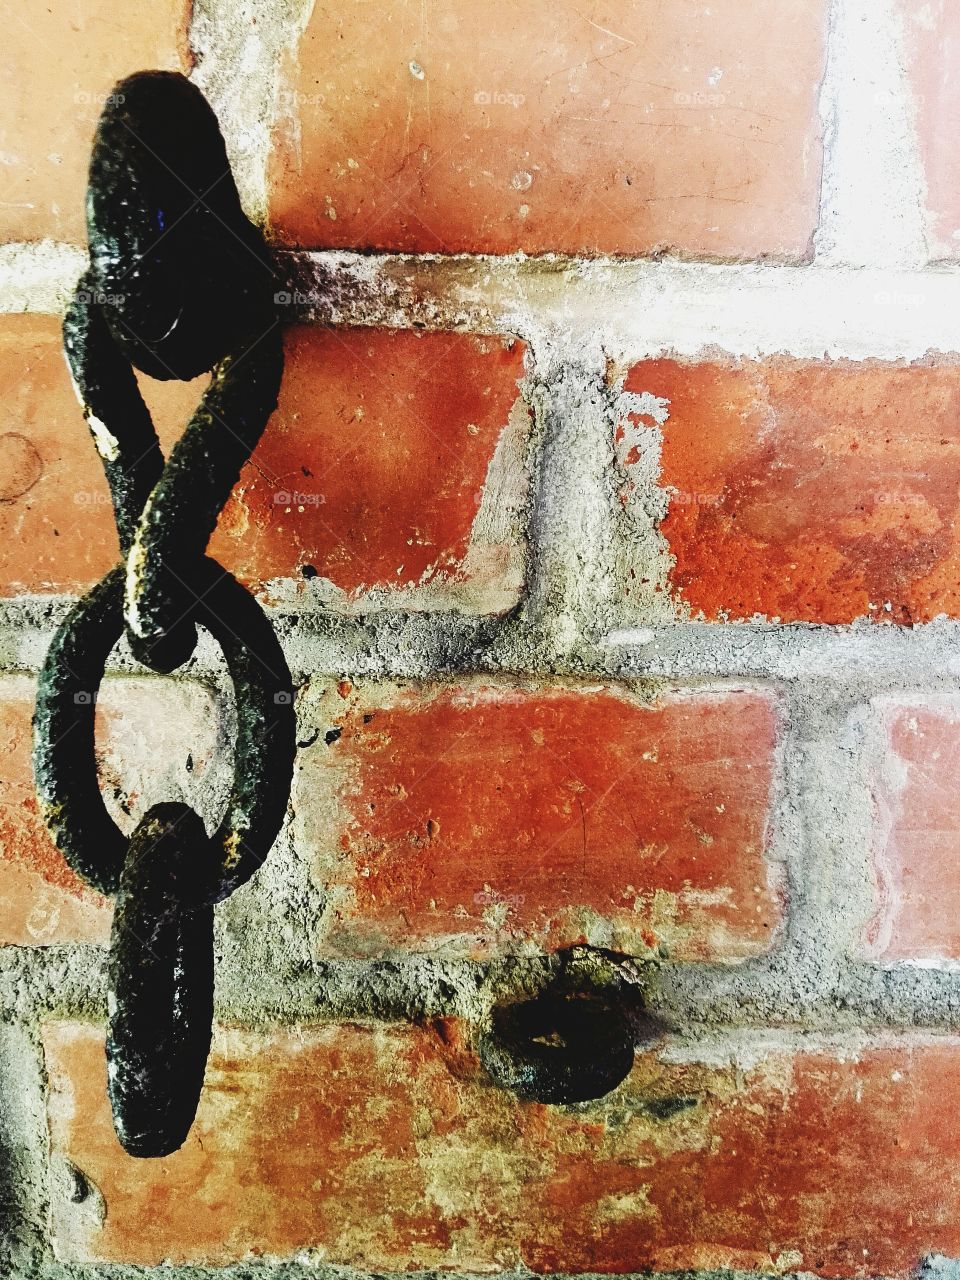 Brick wall with chain